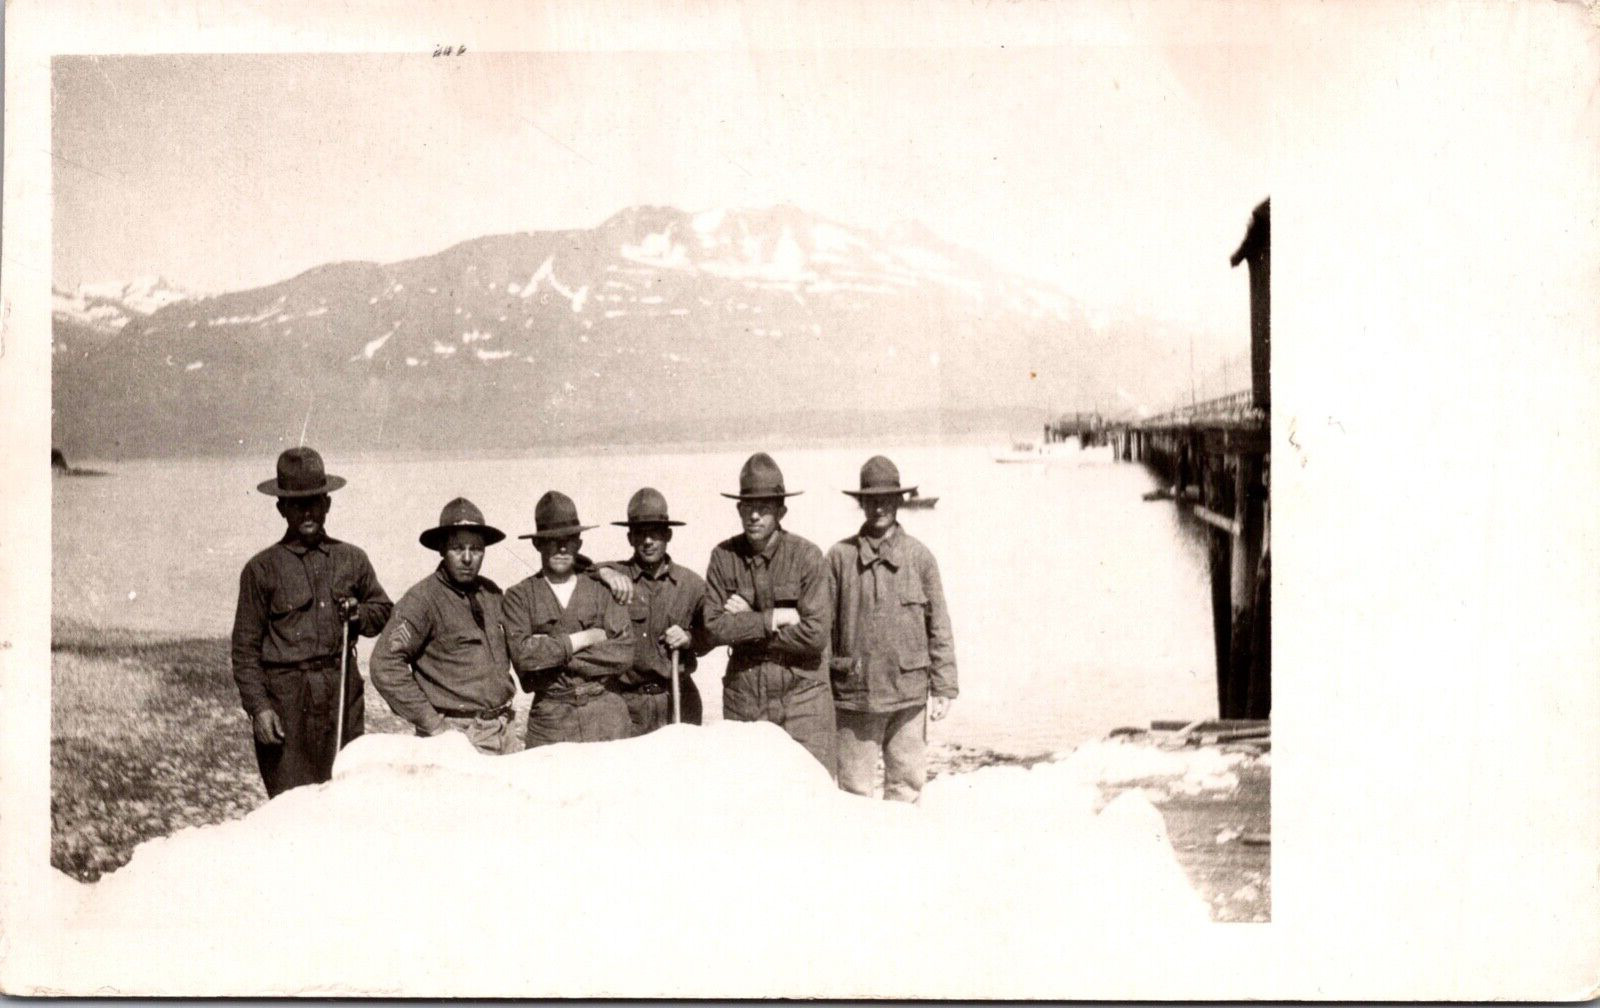 Postcard RPPC Real Photo WWI Sergeant Infantry Soldiers Shovel Snow Mountains